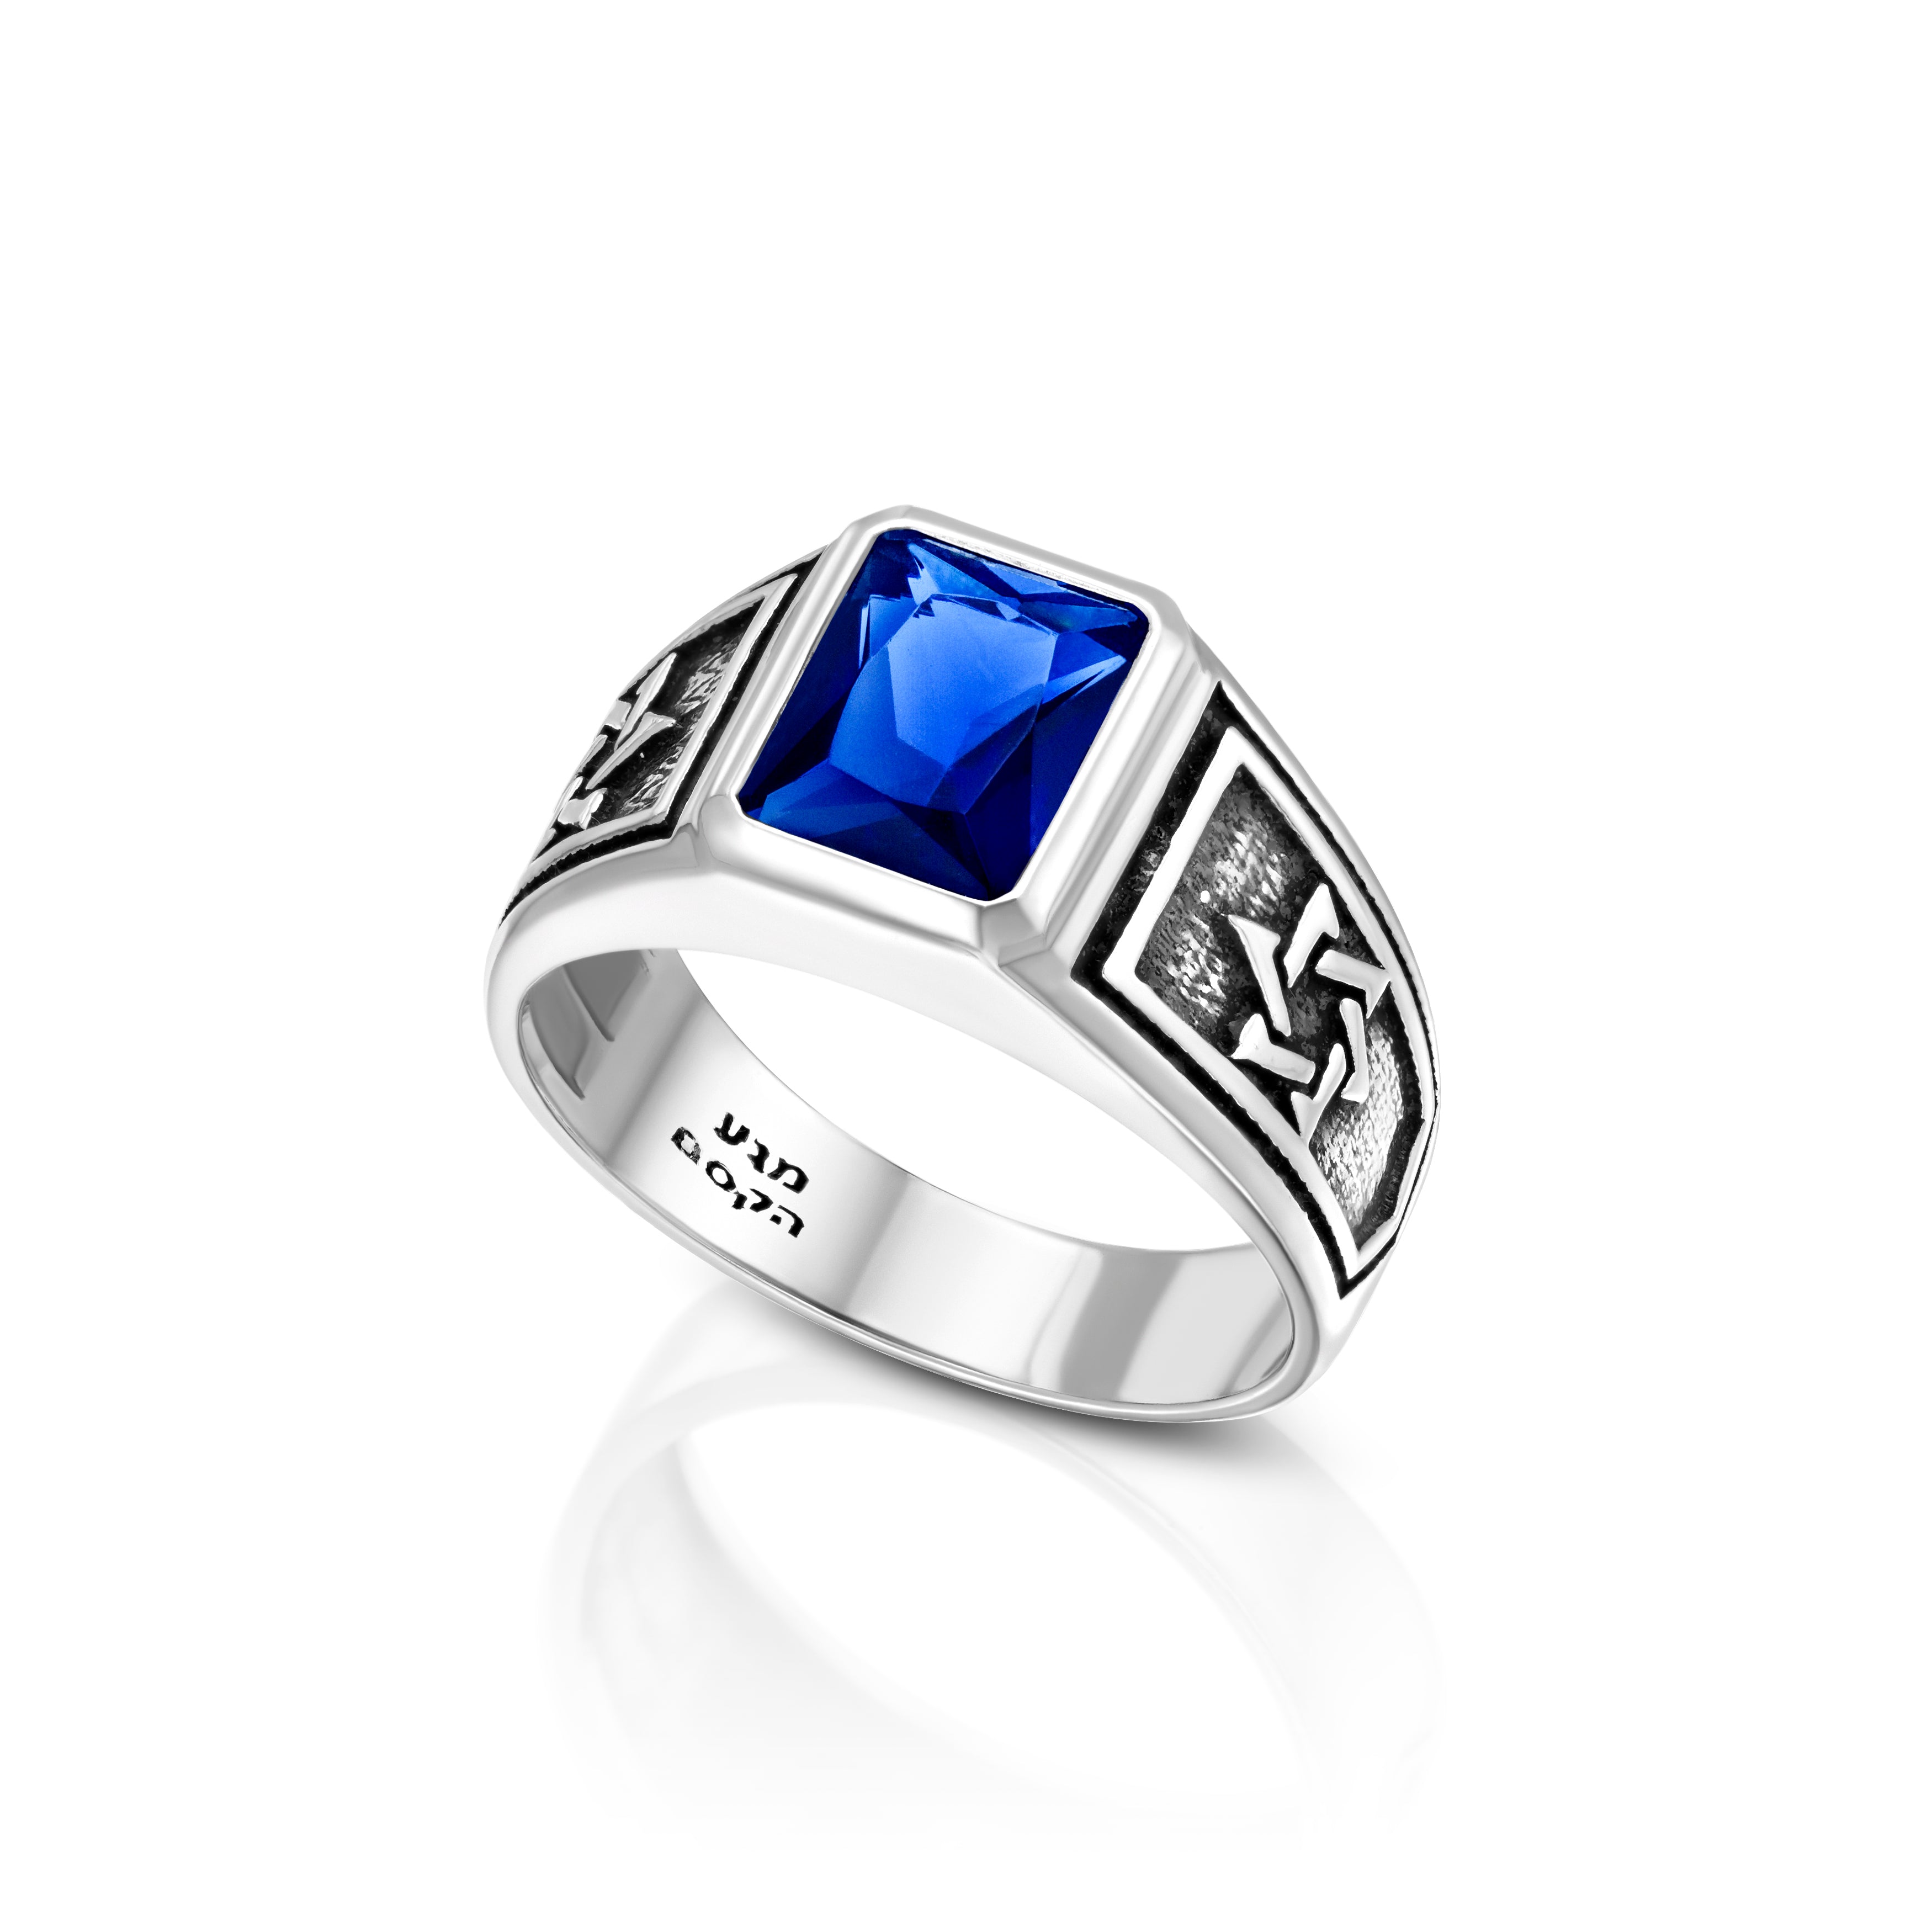 Sterling Silver and Royal Blue Zircon, Men's Star of David College Ring - RectangleRoyal Blue Zircon